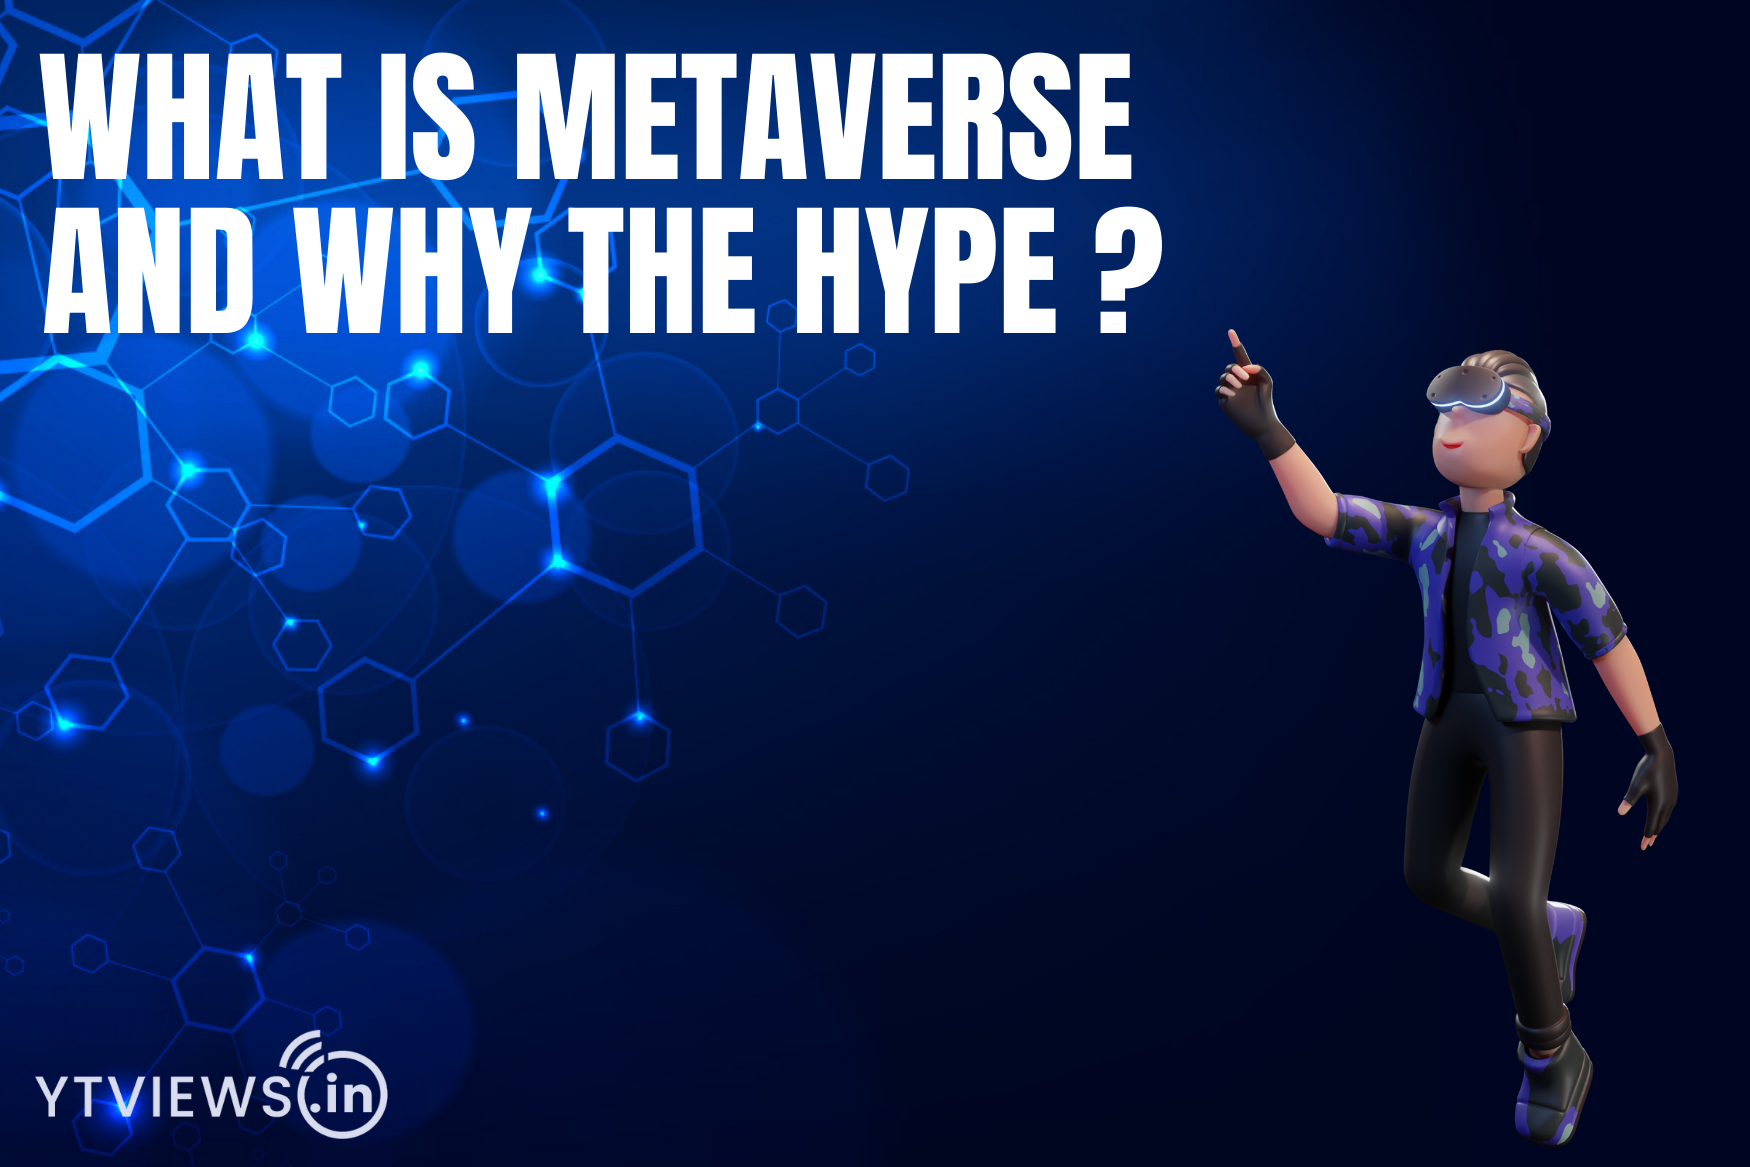 What is metaverse and why the hype?